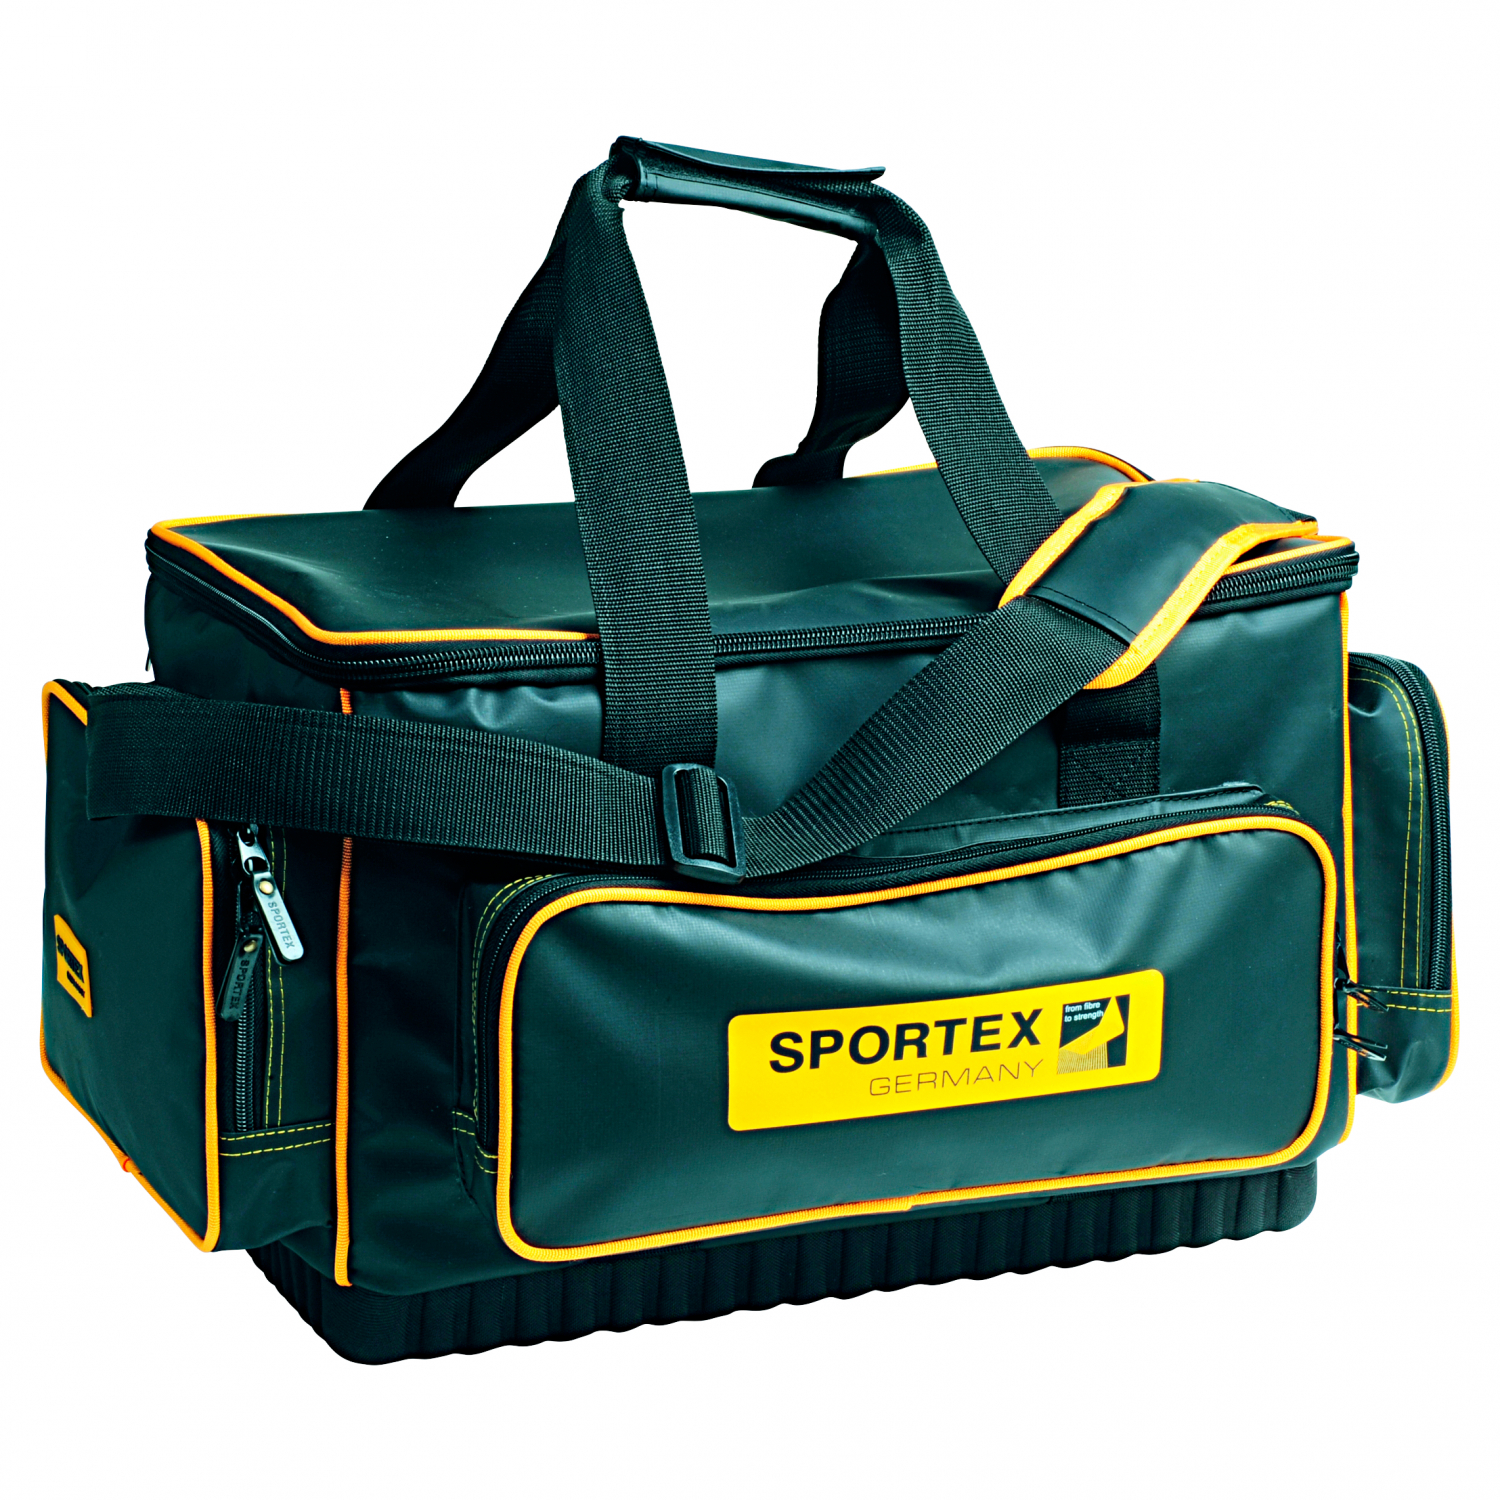 Sportex Sportex Carryall made of water-resistant PVC 